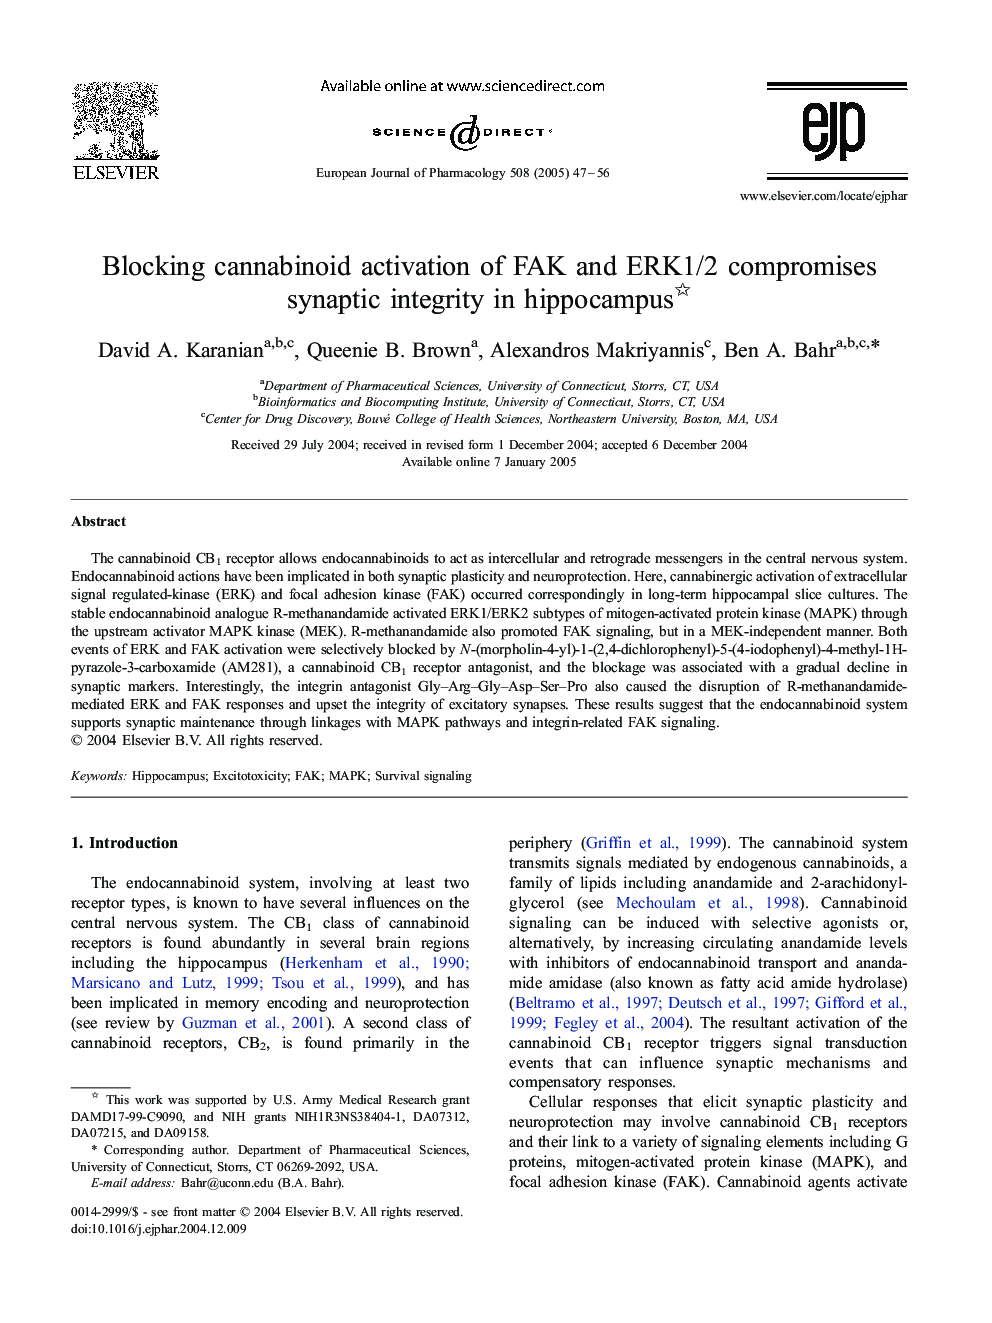 Blocking cannabinoid activation of FAK and ERK1/2 compromises synaptic integrity in hippocampus